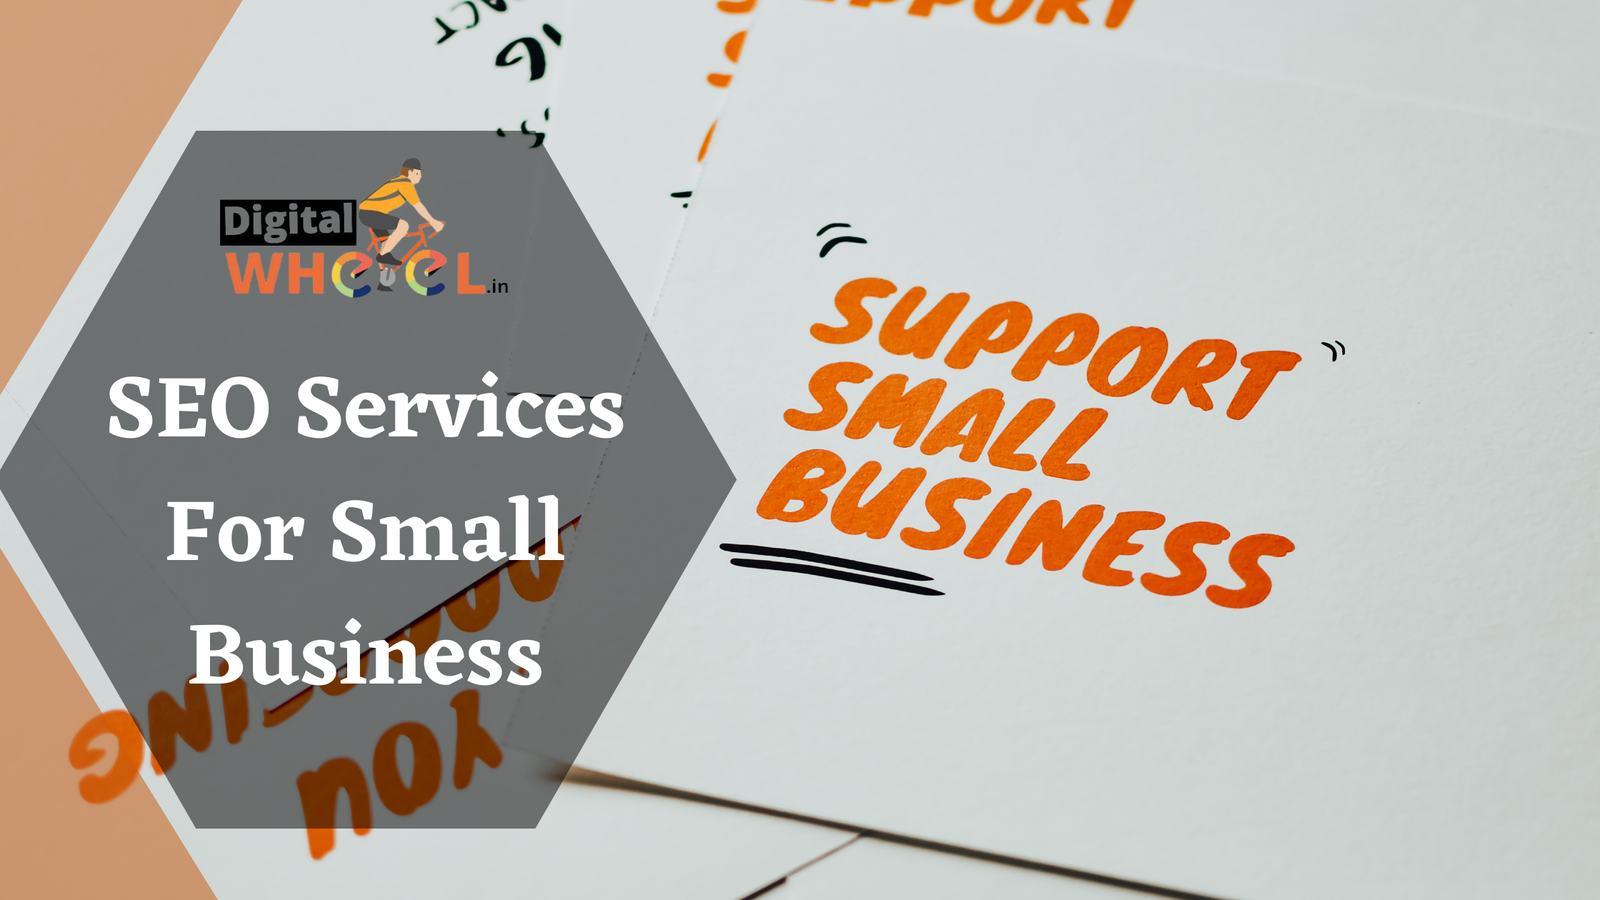 SEO services for small business